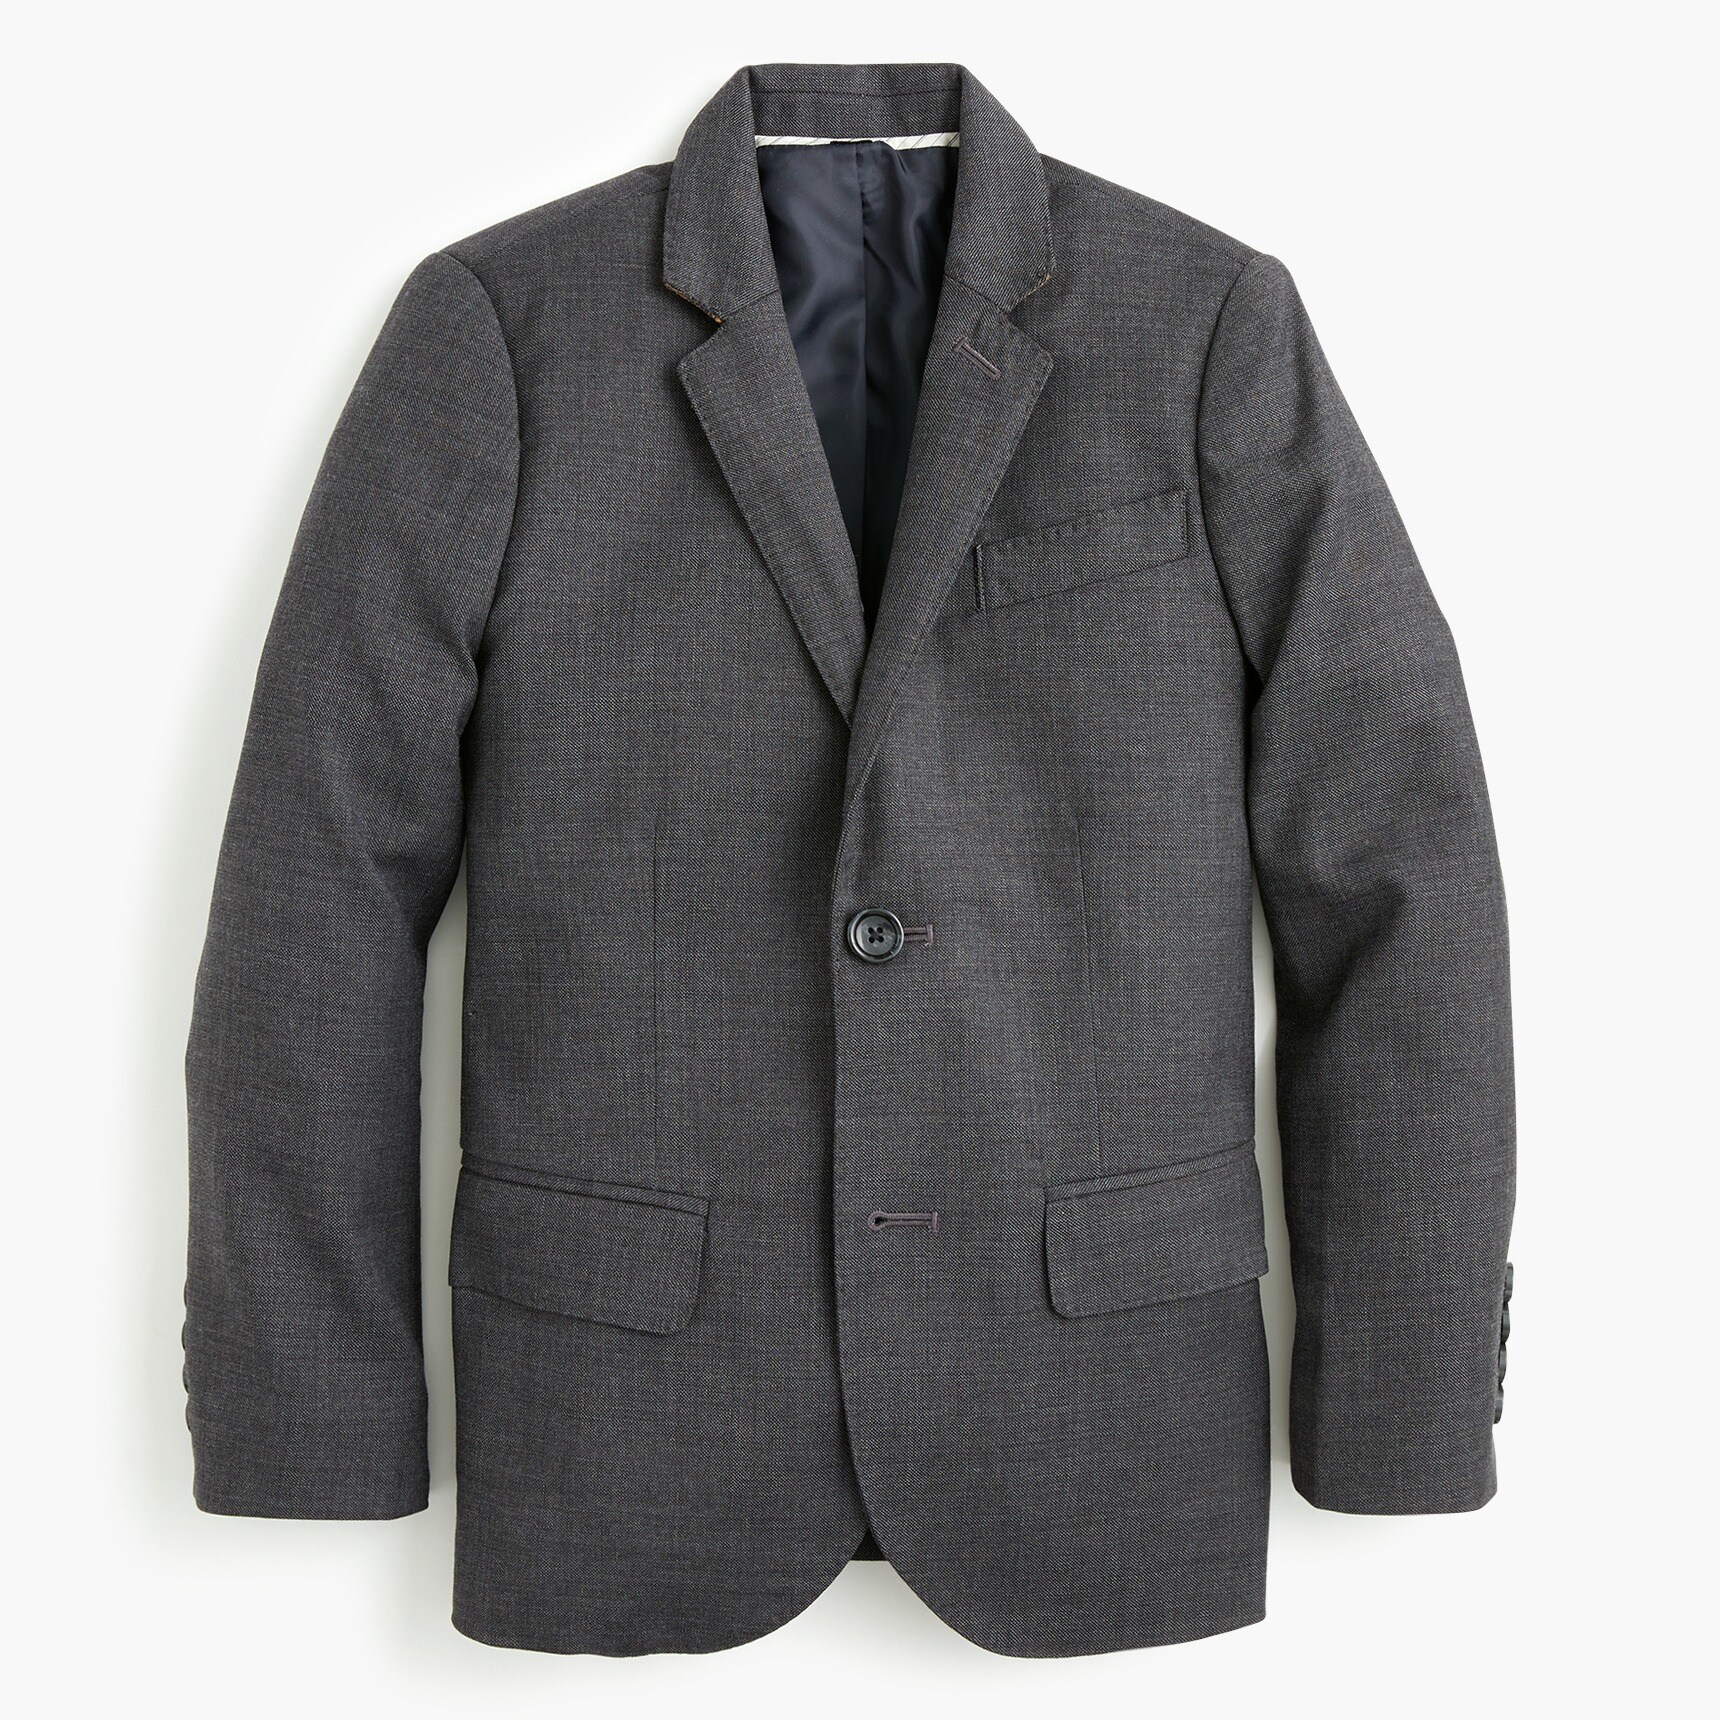 boys Boys' Ludlow suit jacket in stretch worsted wool blend